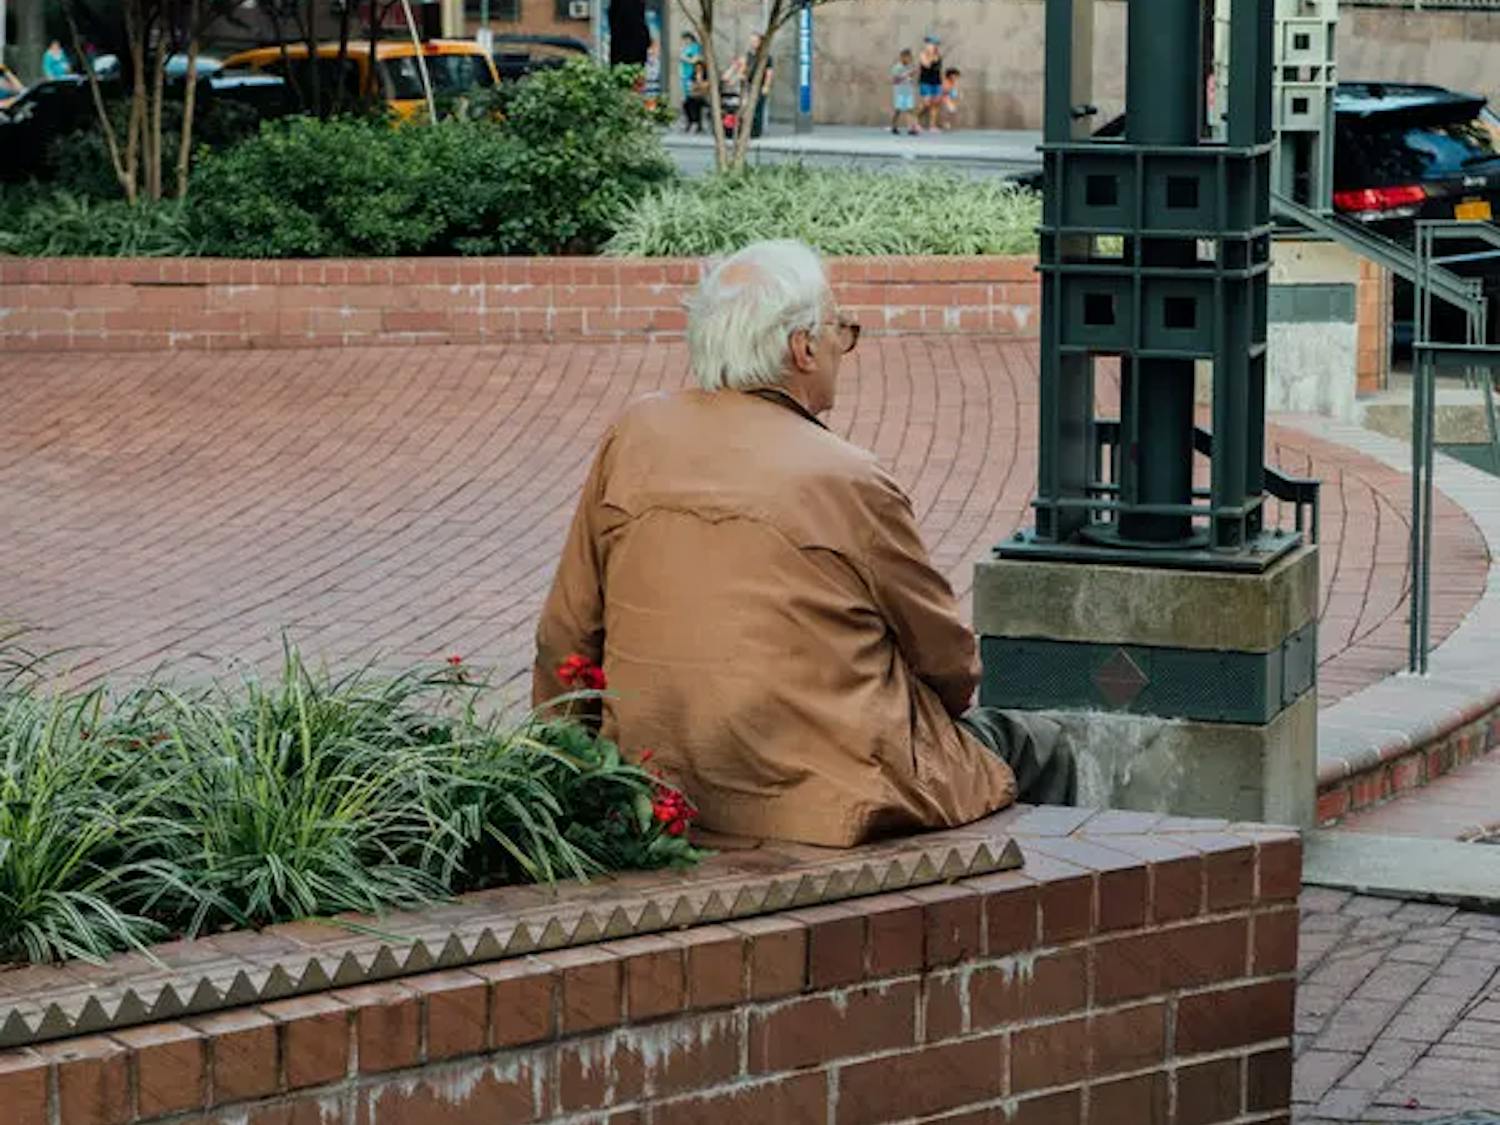 A man taking a rest on a brick bench | Source: The New York Times